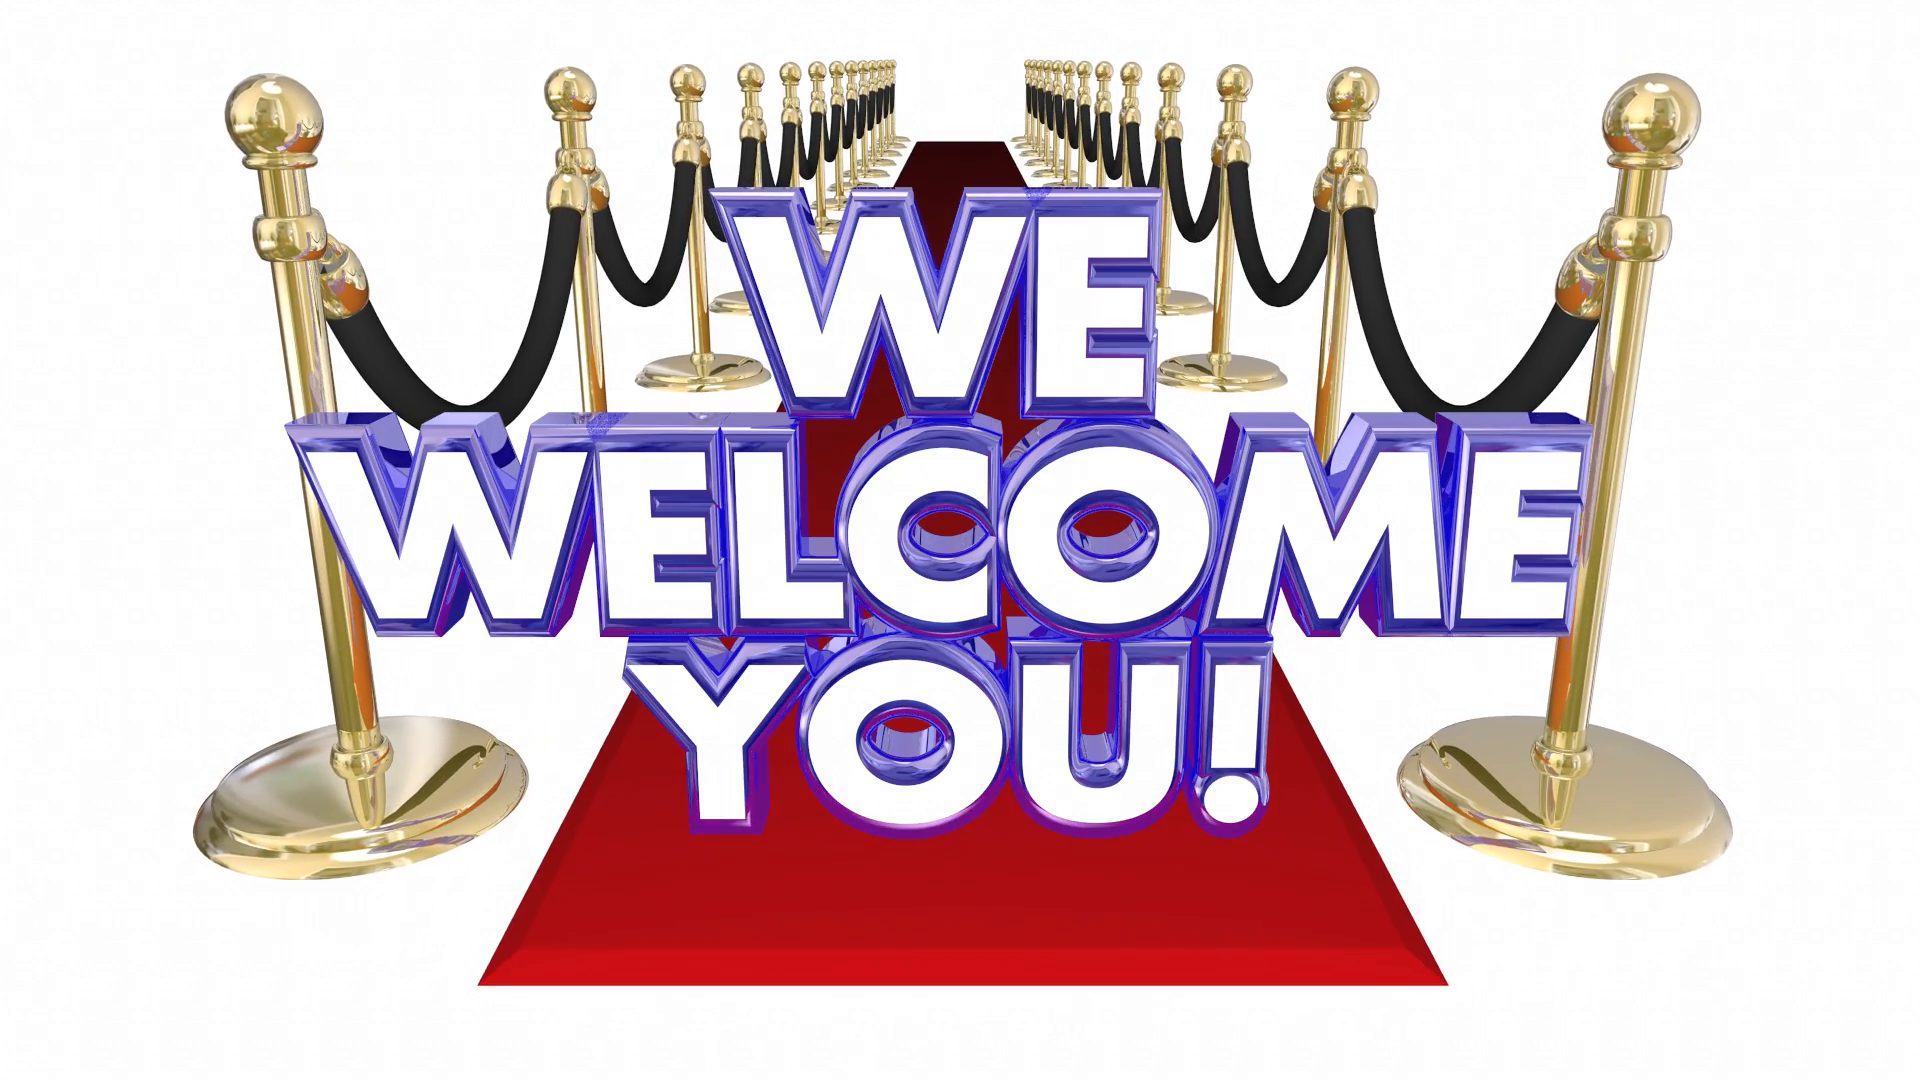 we-welcome-you-red-carpet-friendly-greeting-words-animation_4f49s1ttx__F0014.png